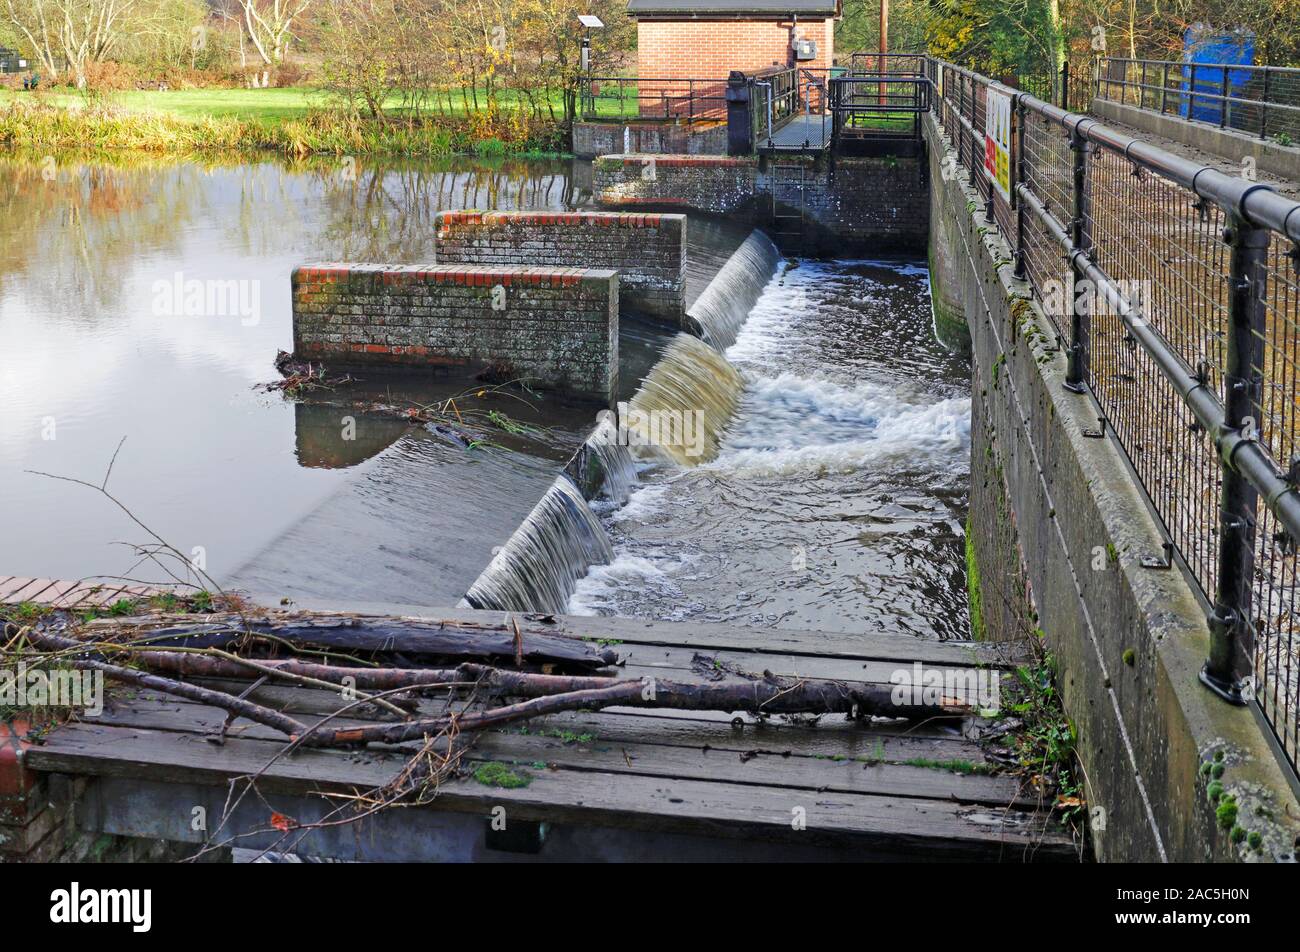 A weir and water gauging station on the River Bure by the remains of the old watermill at Horstead, Norfolk, England, United Kingdom, Europe. Stock Photo